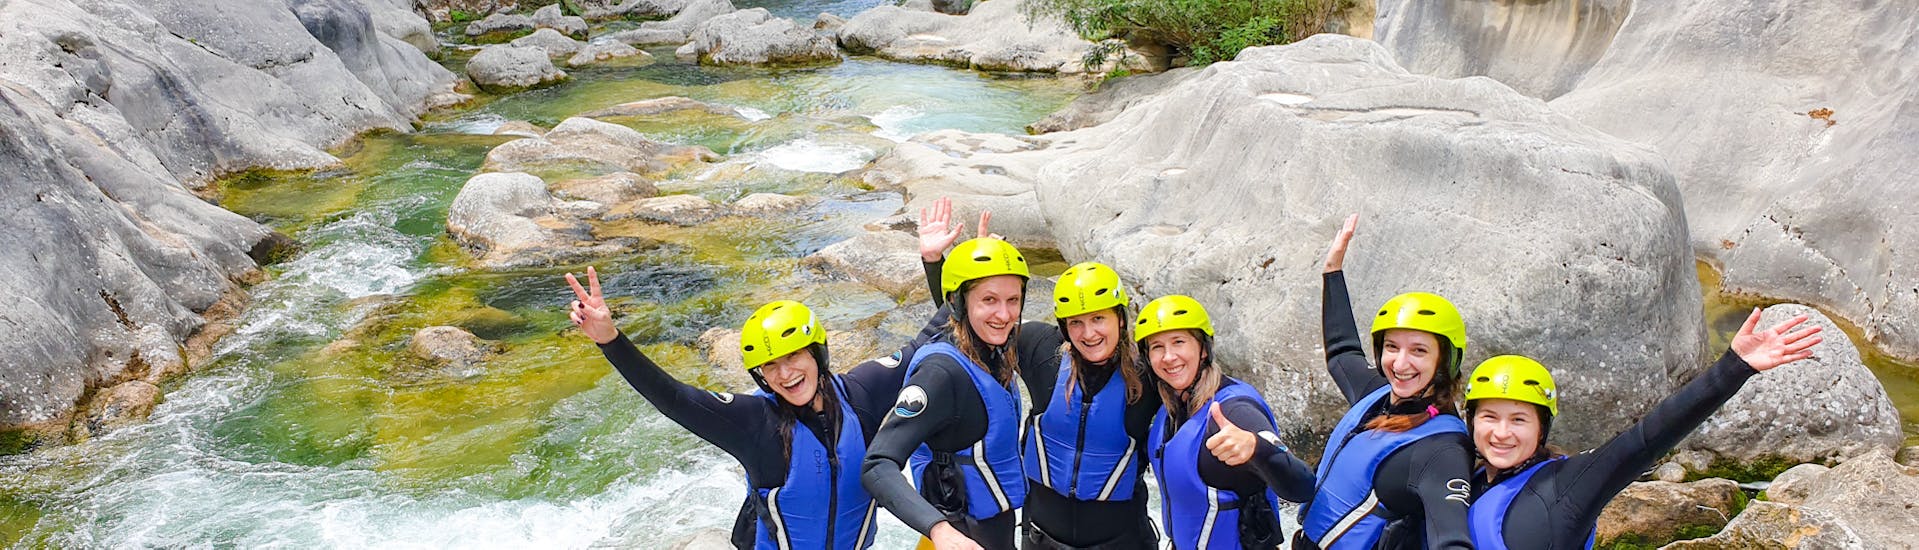 A group of people from Iris Adventure Dalmatia on a rock by the Cetina River.